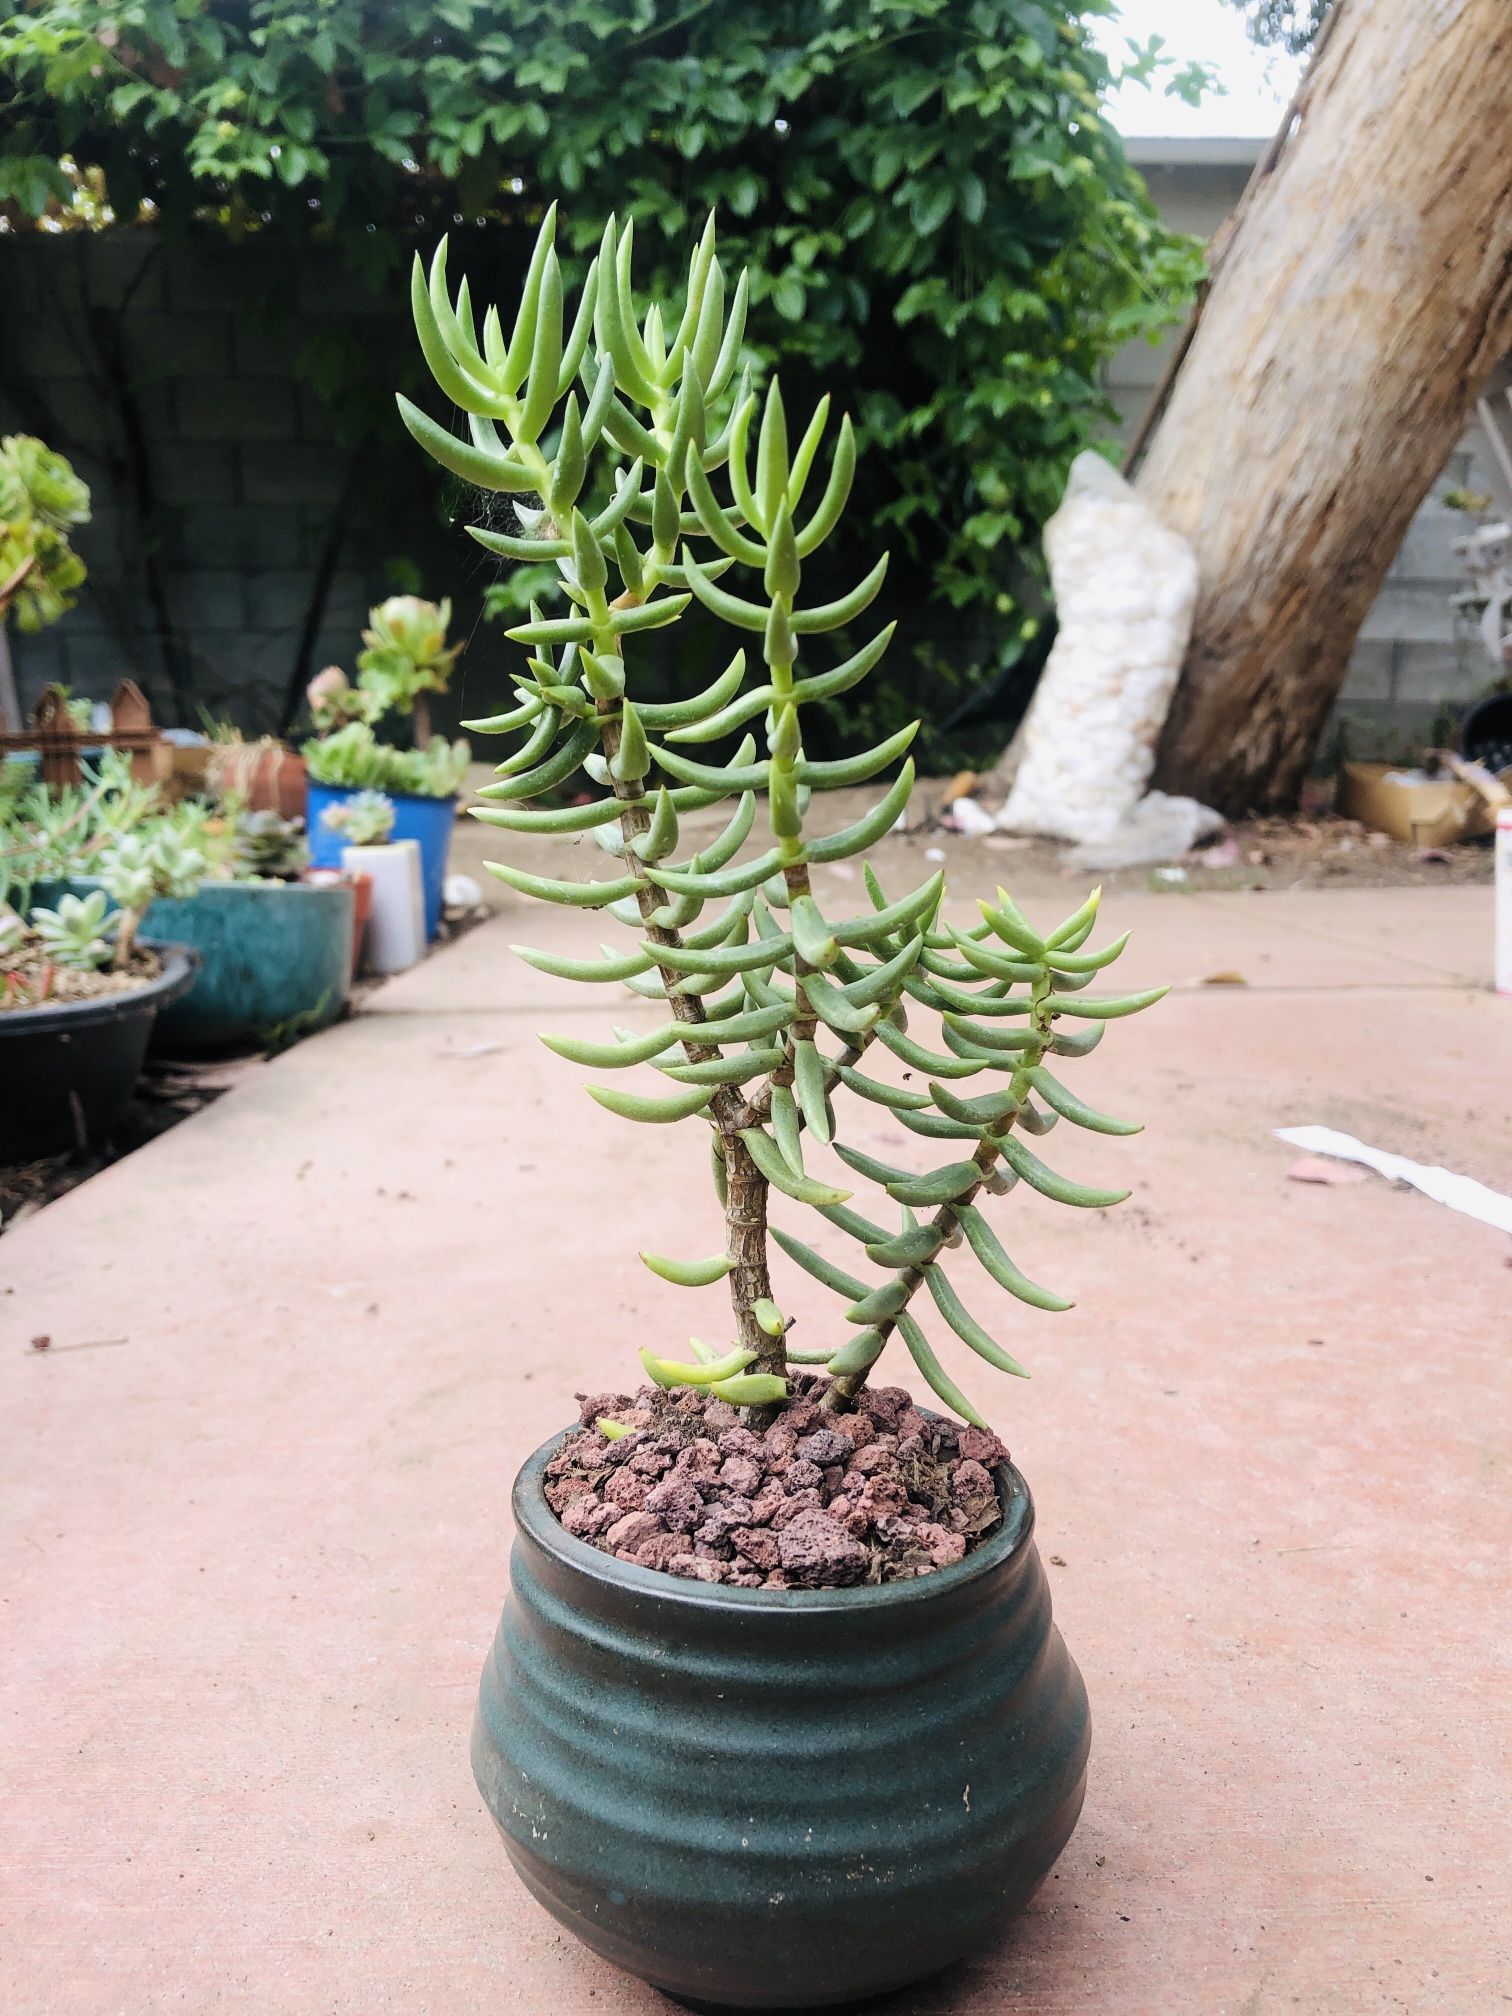 Pine tree succulent live rooted